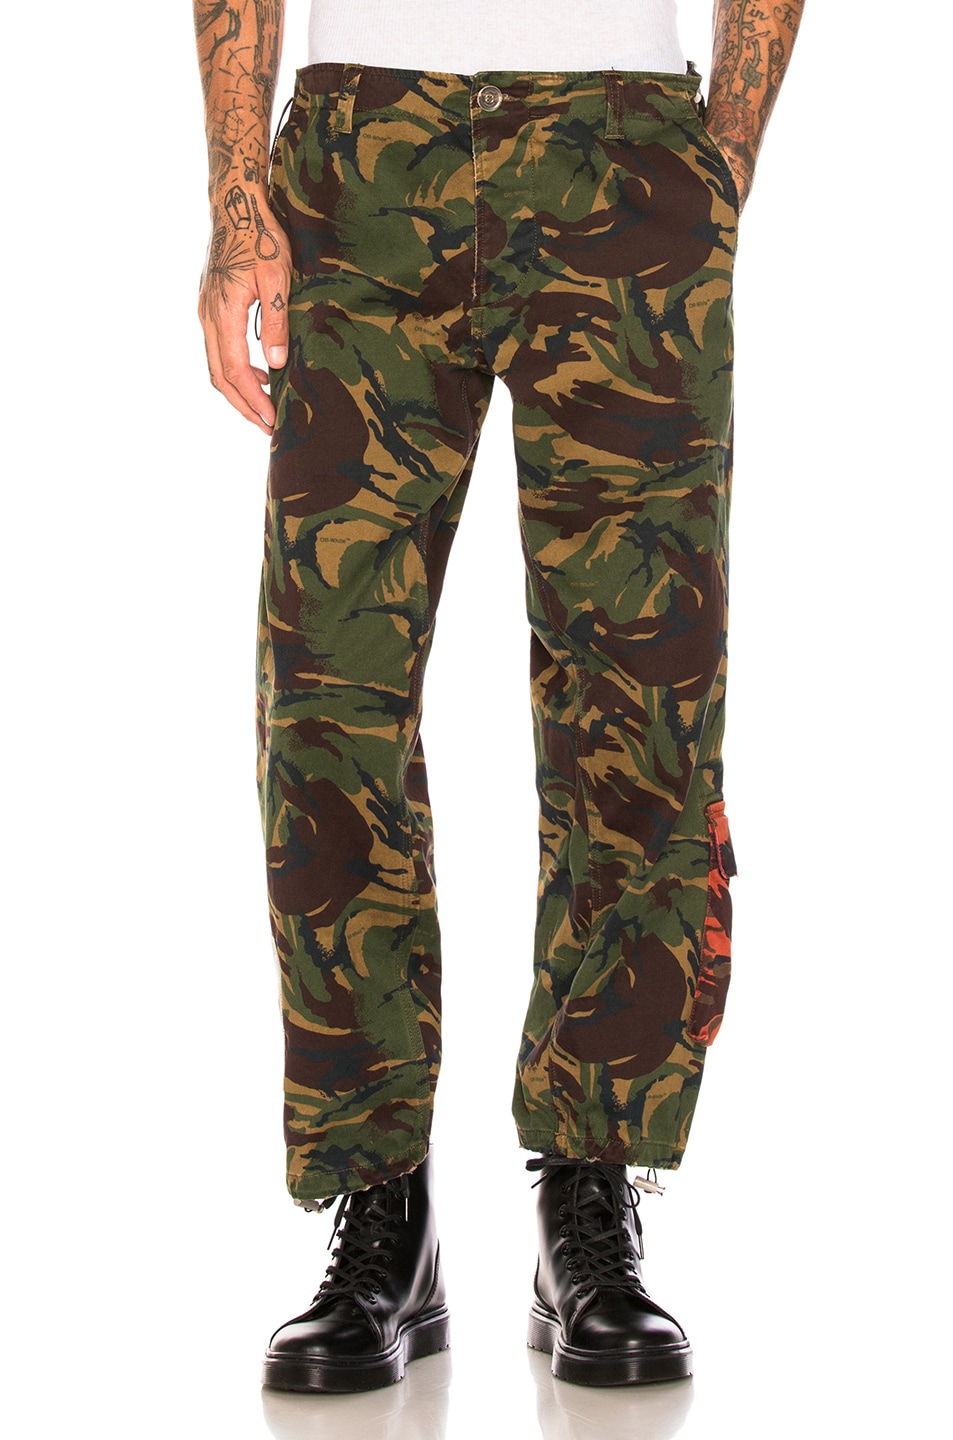 OFF-WHITE Chino Work Pants in Camo | FWRD